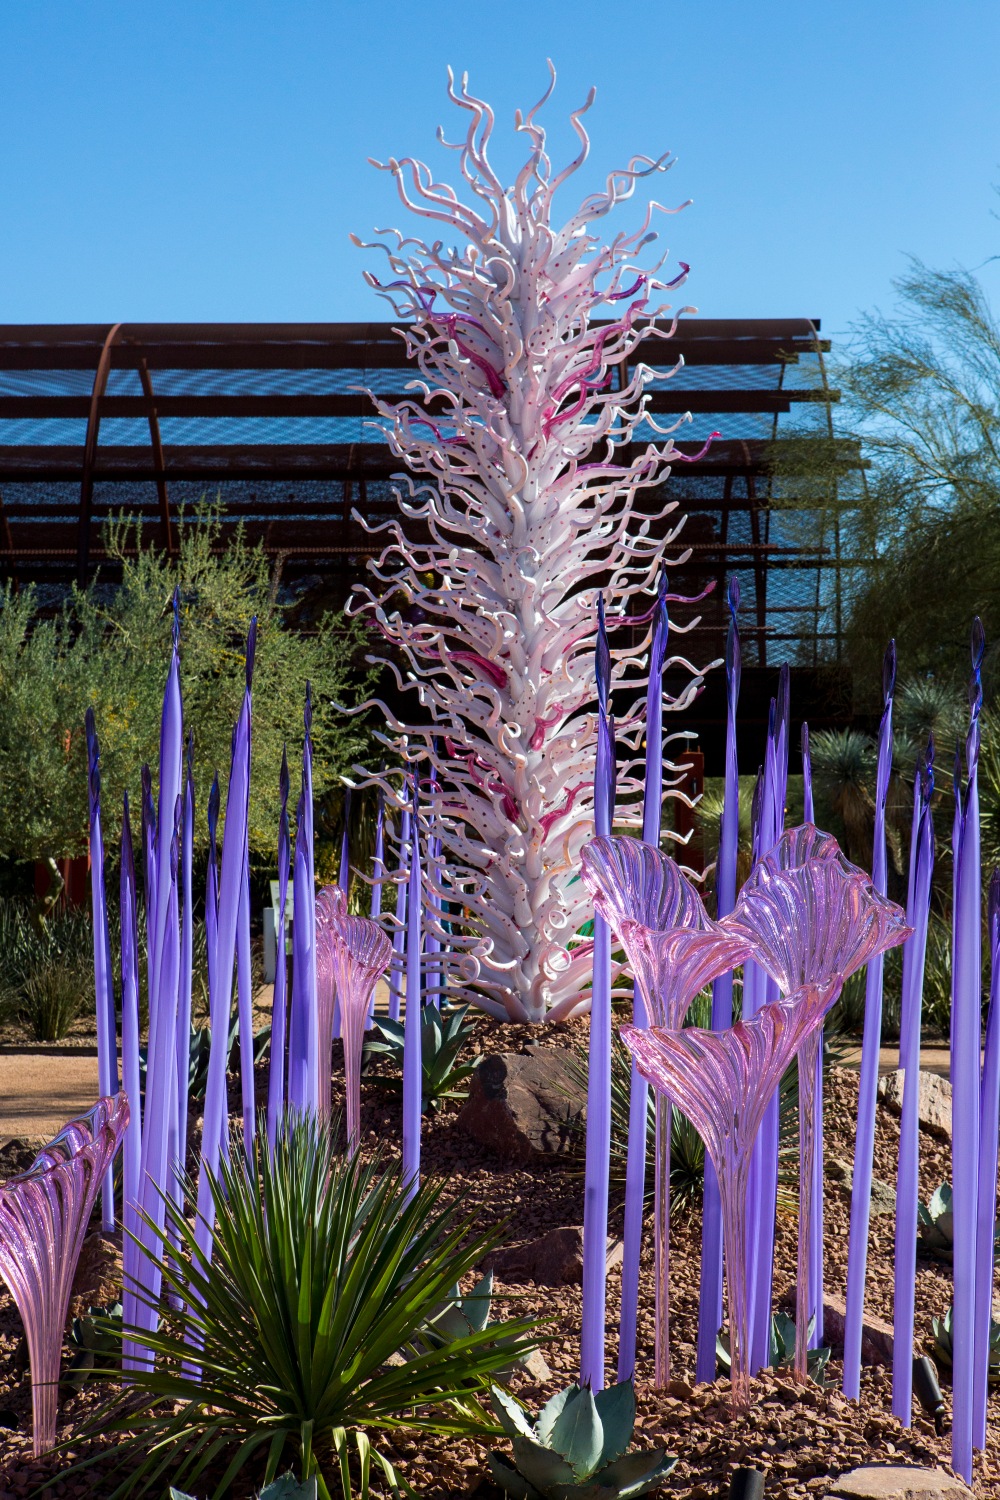 Dale Chihuly, White Tower, 1997 and Erbium Pink Fiori, 2013